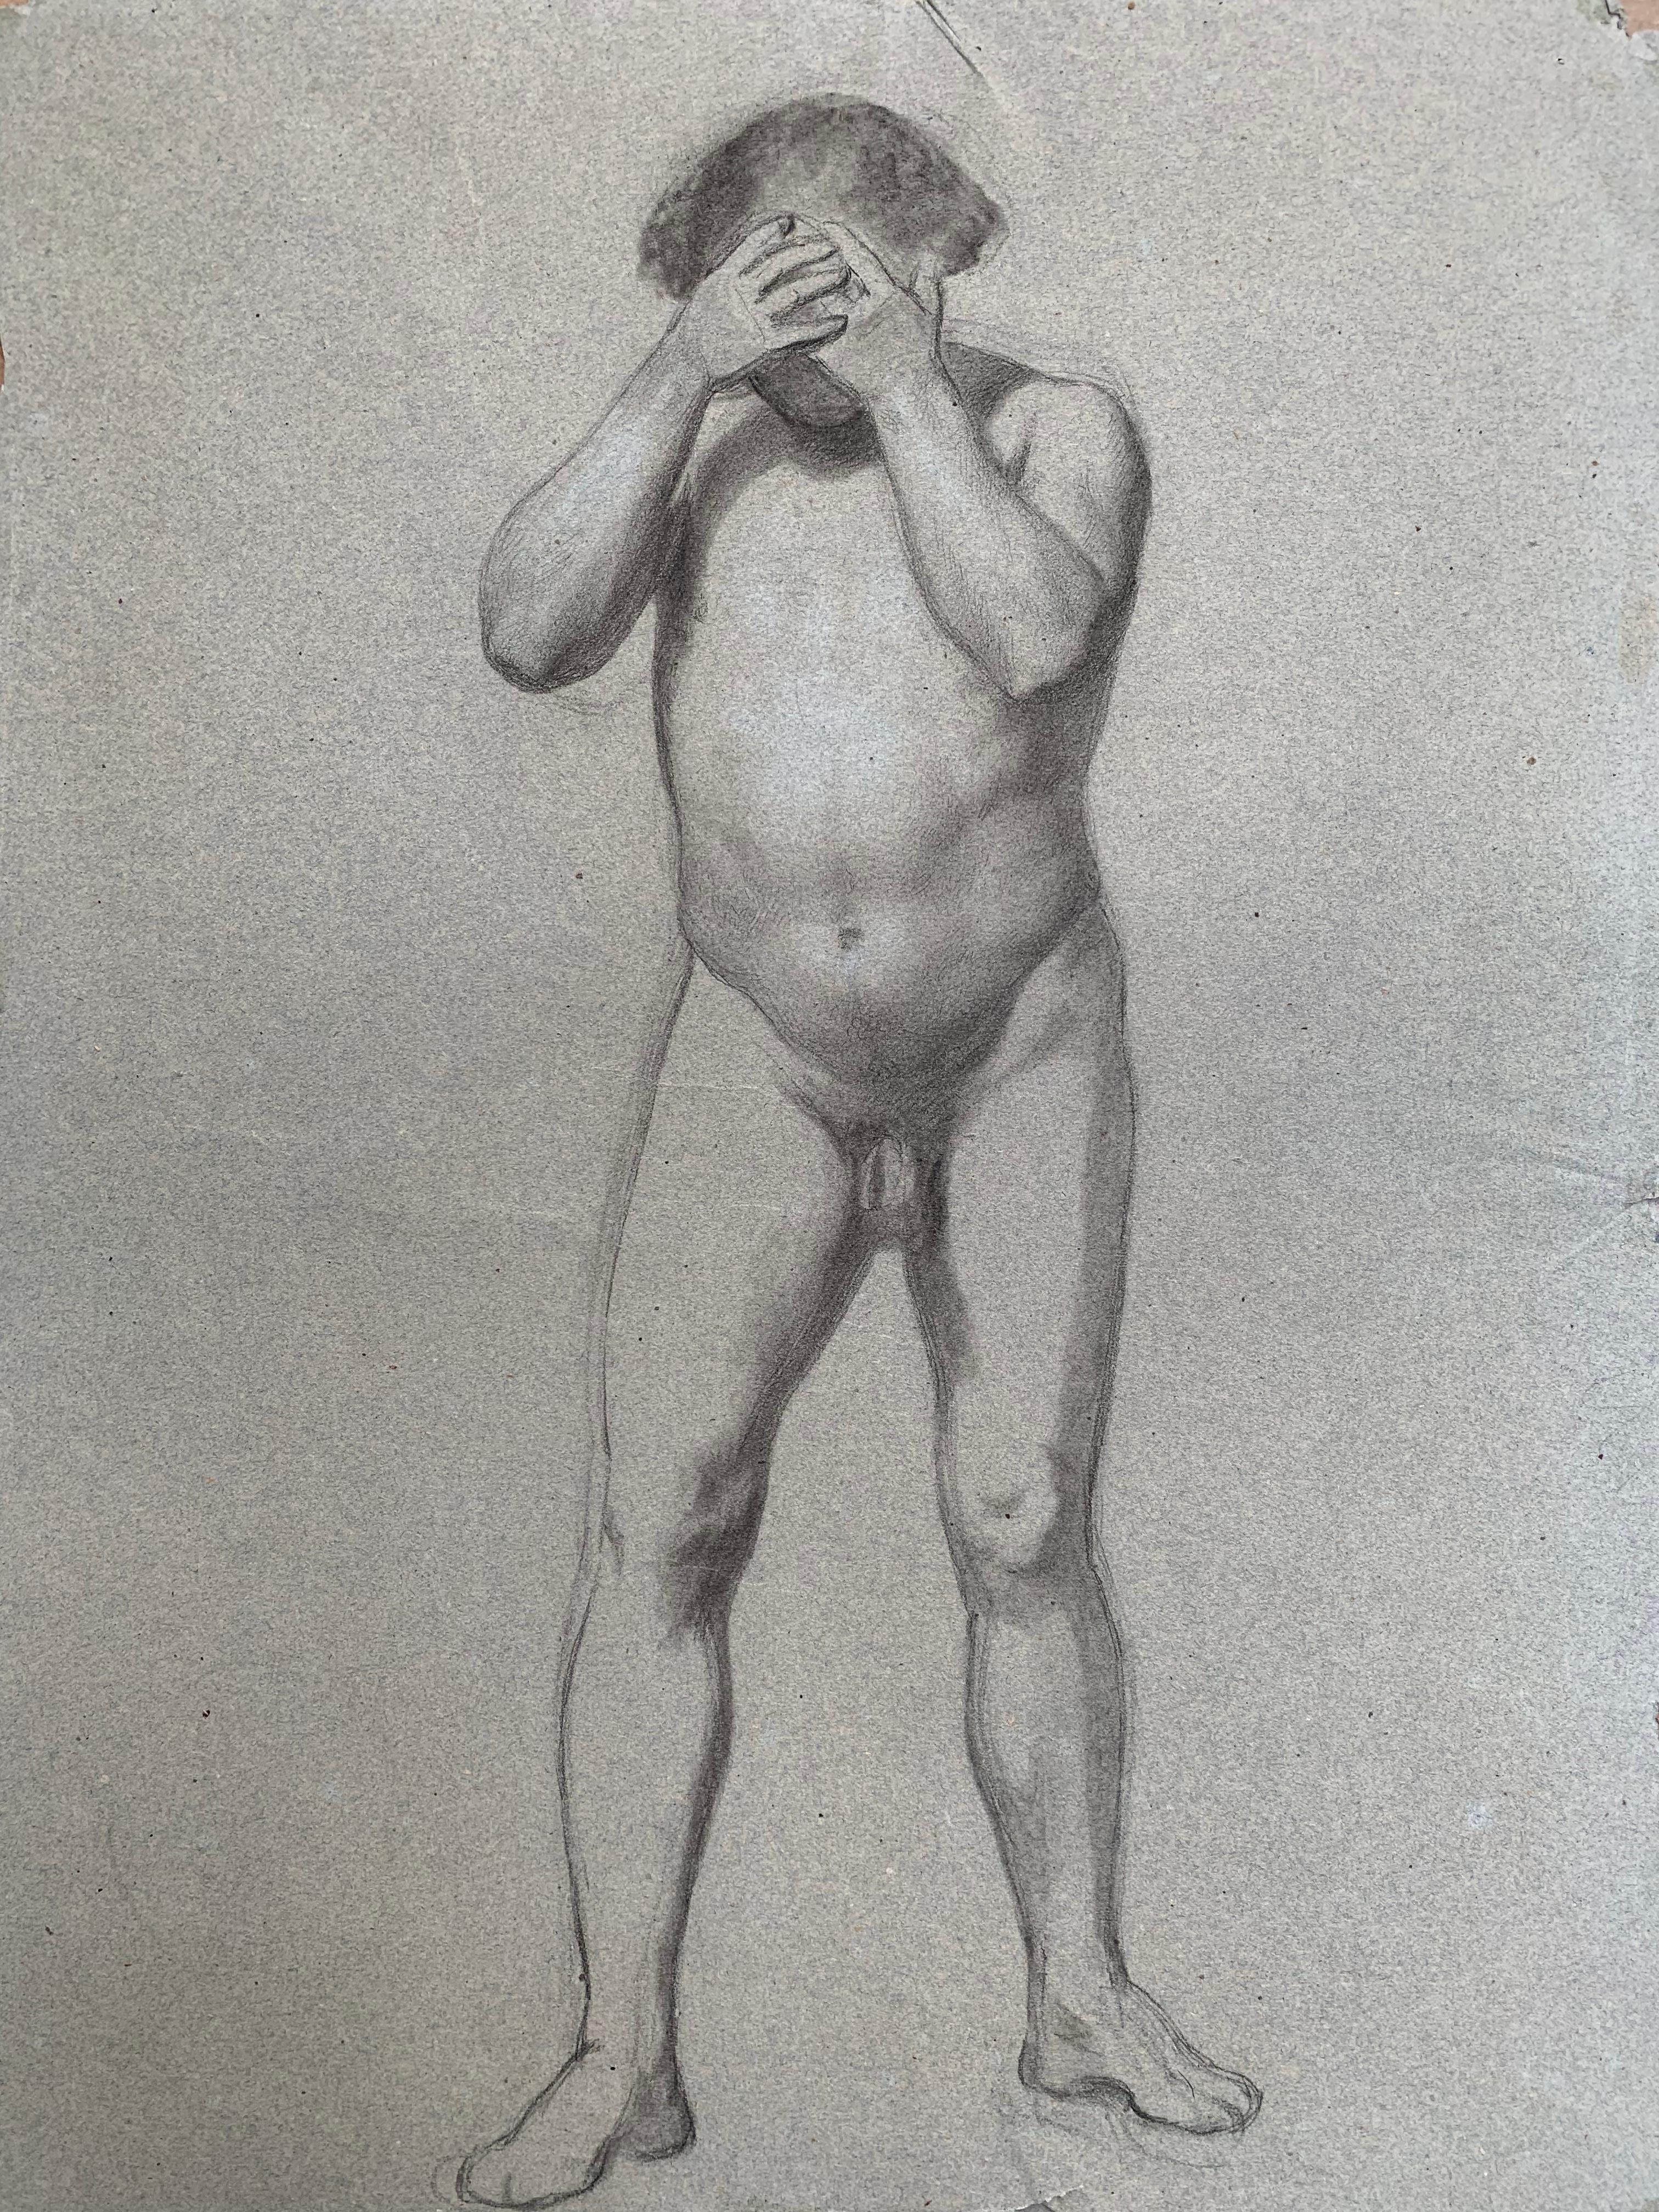 Preparatory anatomical study for the figure of a man with hands on his face. For Sale 7